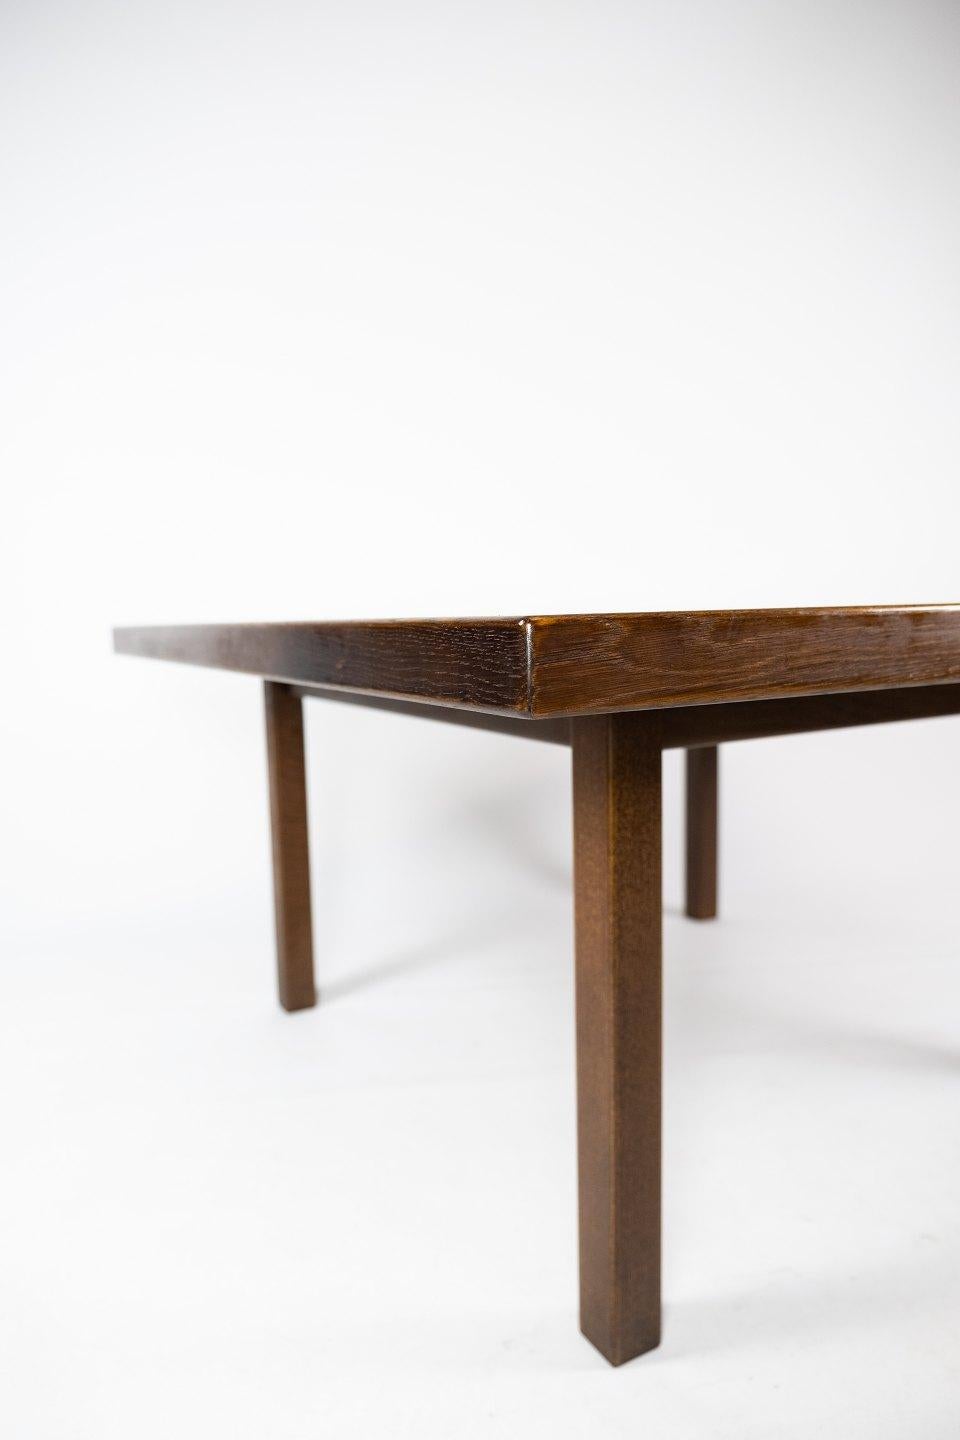 Mid-20th Century Coffee Table in Dark Oak of Danish Design from the 1960s